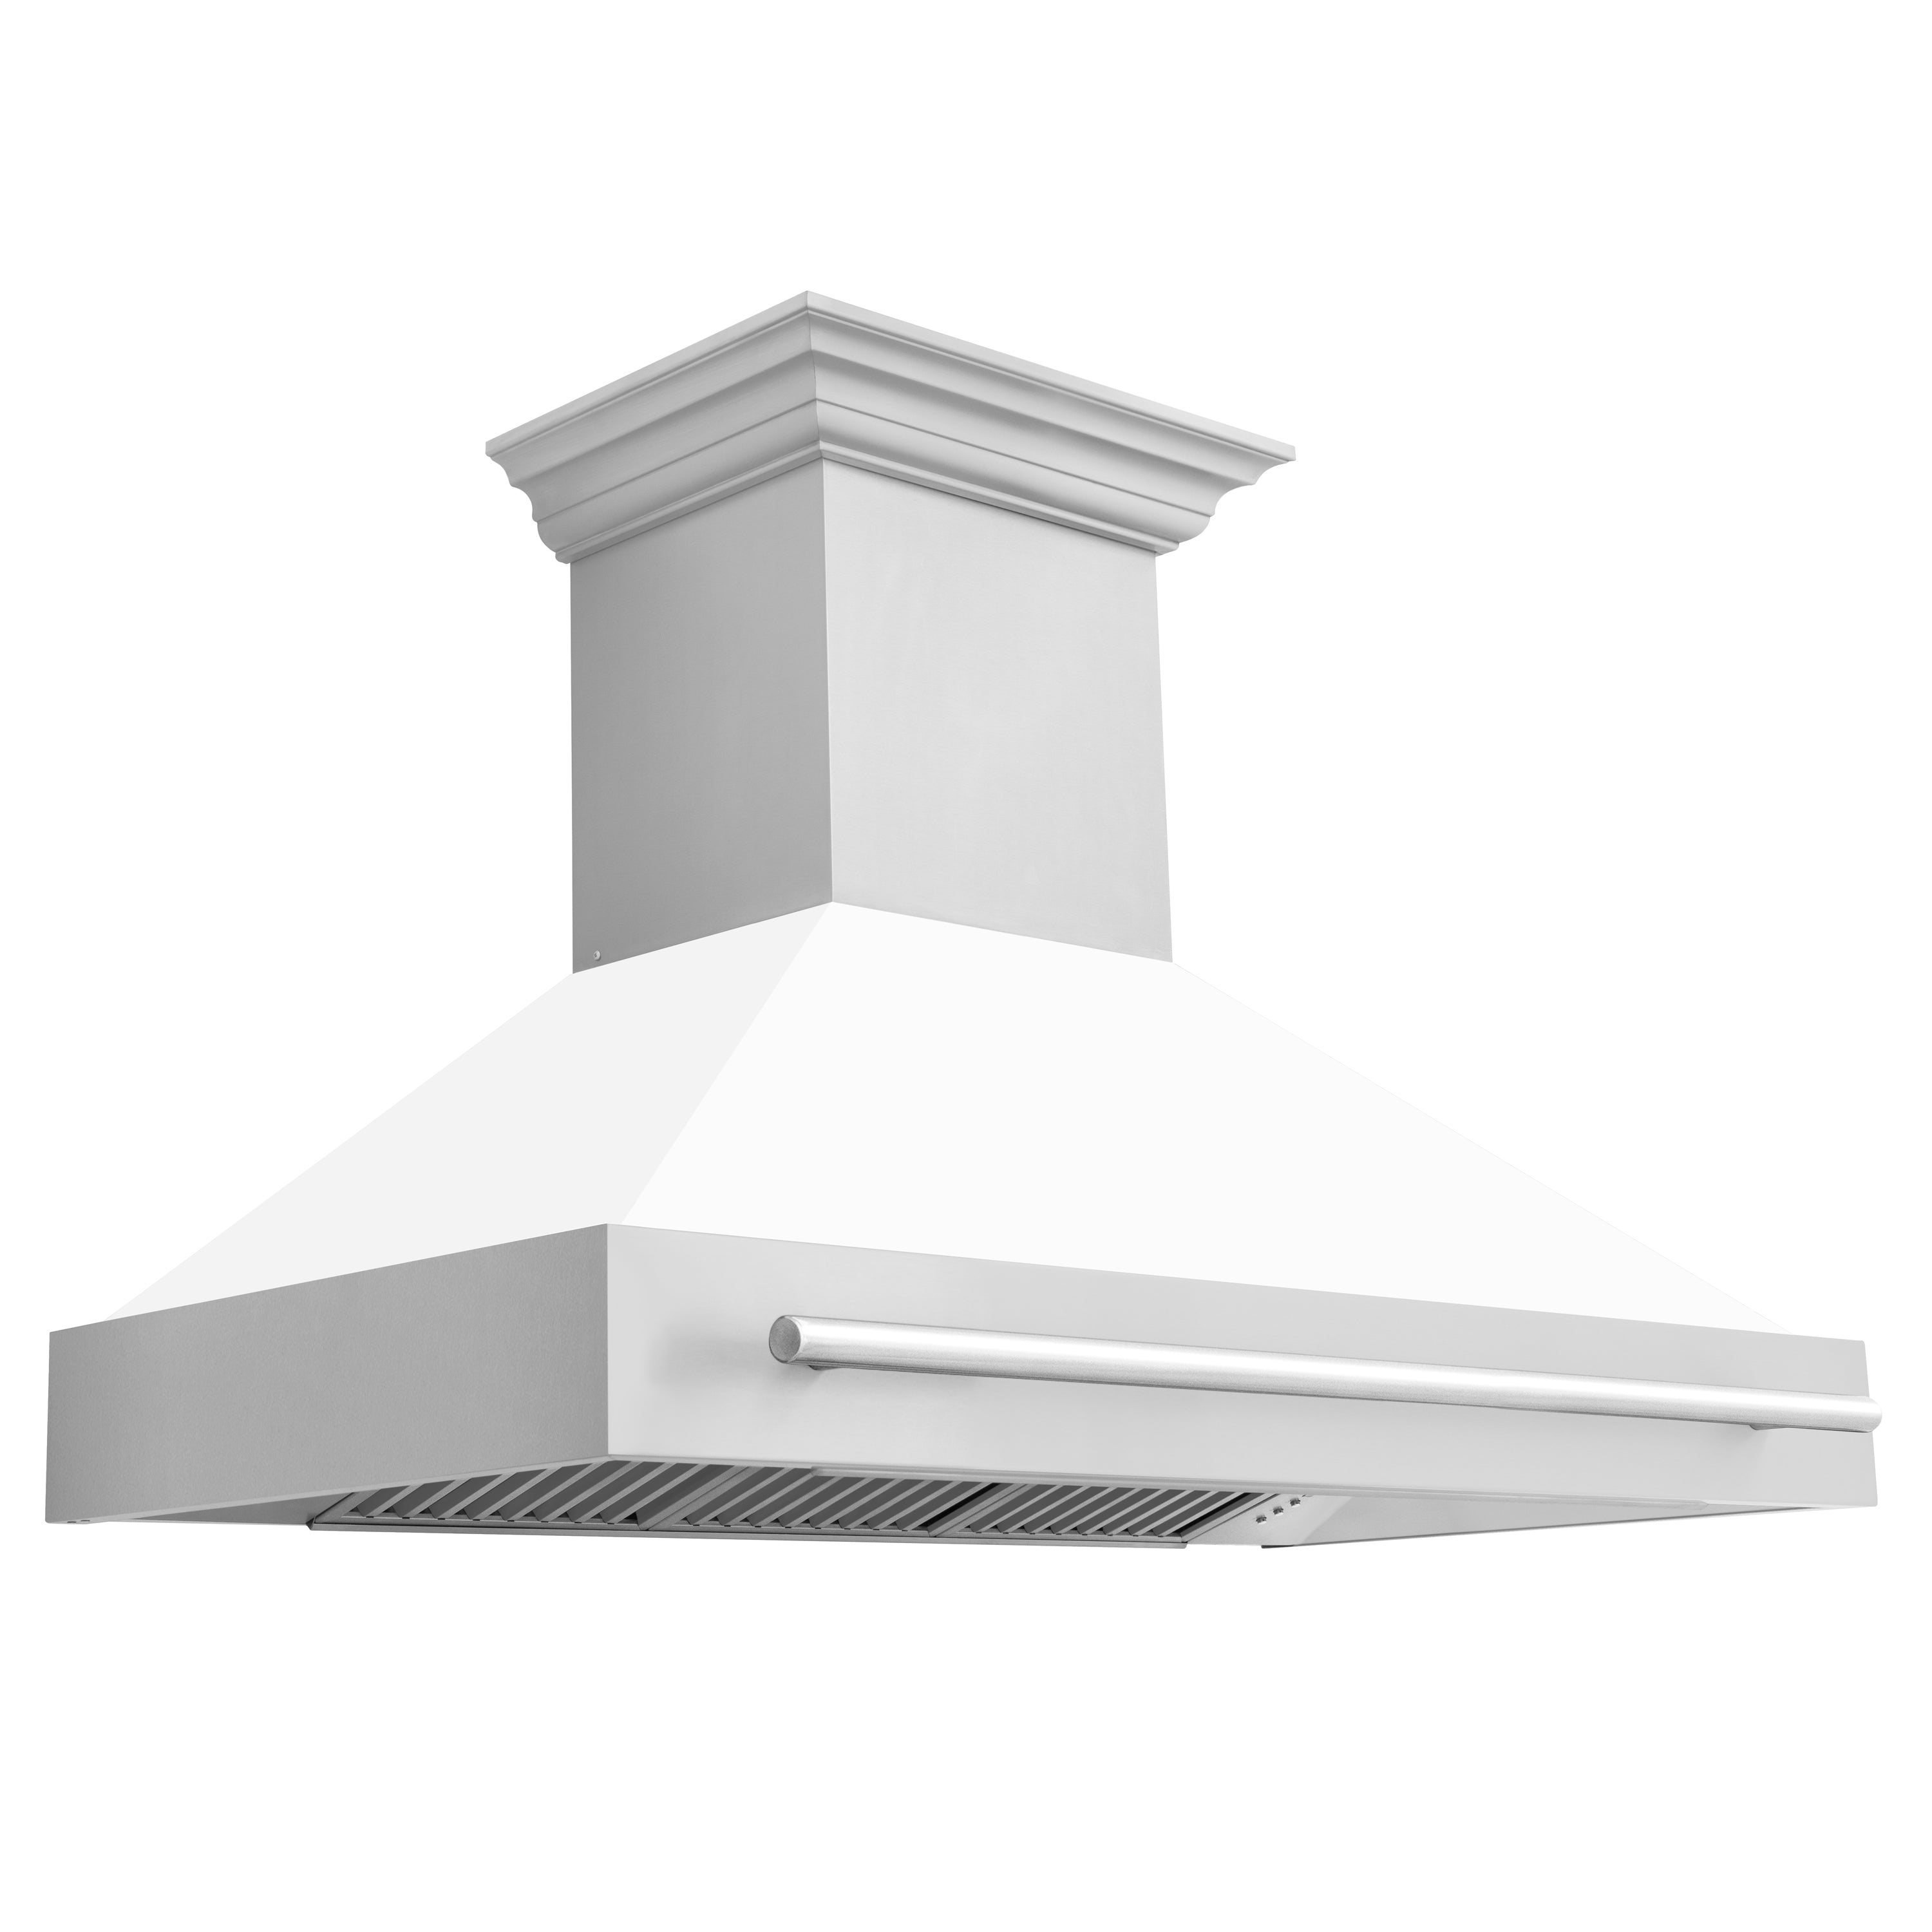 ZLINE 48" Stainless Steel Range Hood with White Matte Shell and Stainless Steel Handle (8654STX-WM-48)